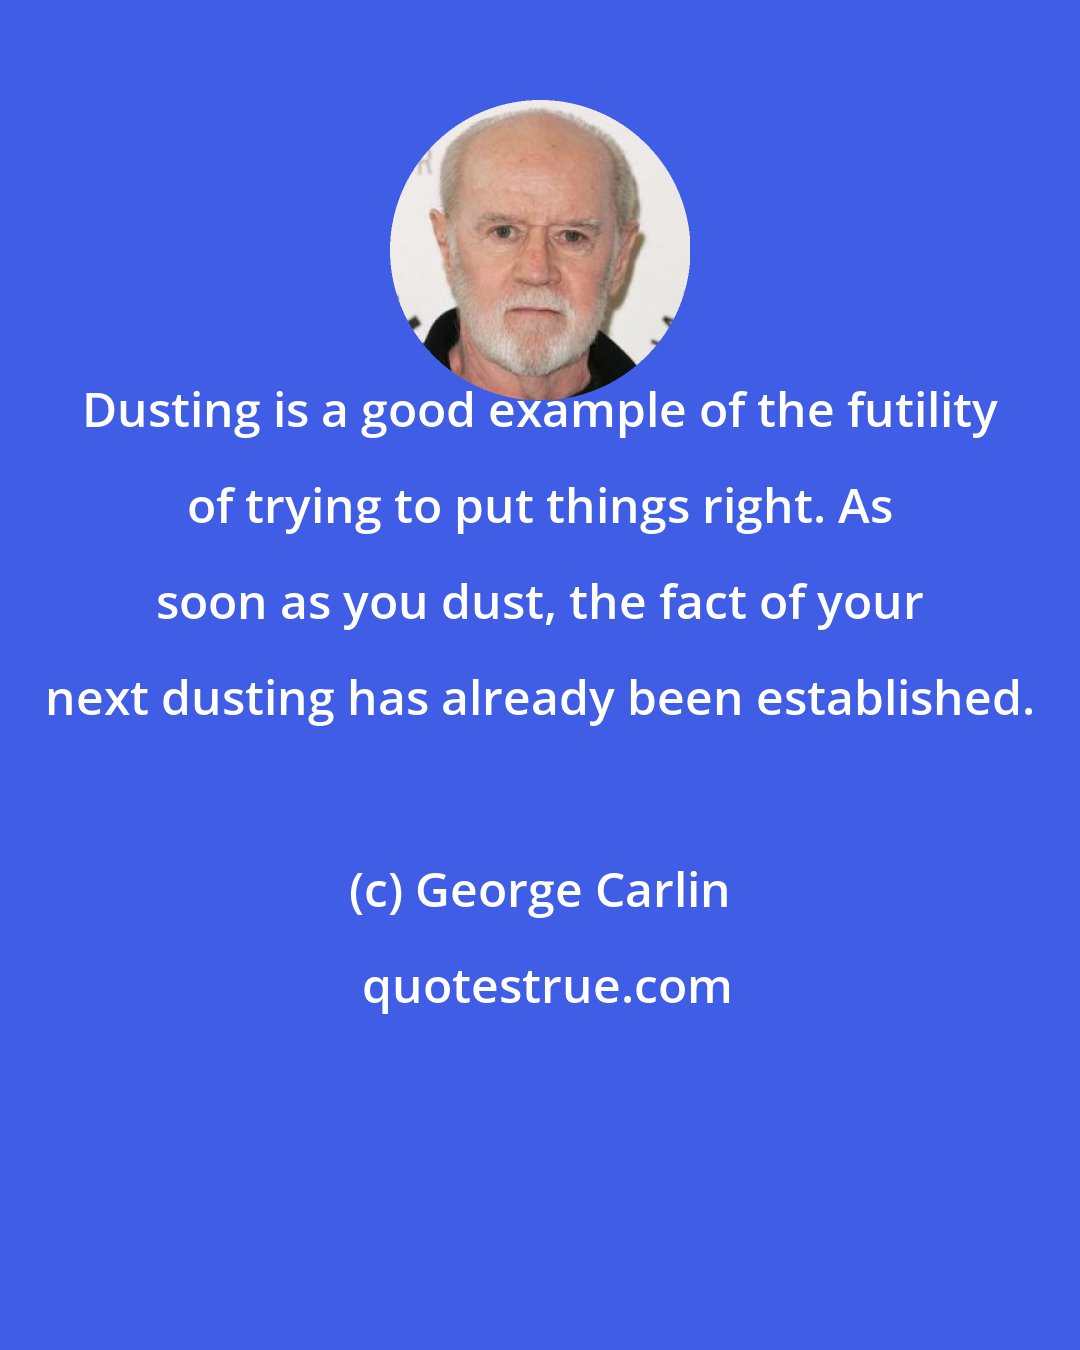 George Carlin: Dusting is a good example of the futility of trying to put things right. As soon as you dust, the fact of your next dusting has already been established.